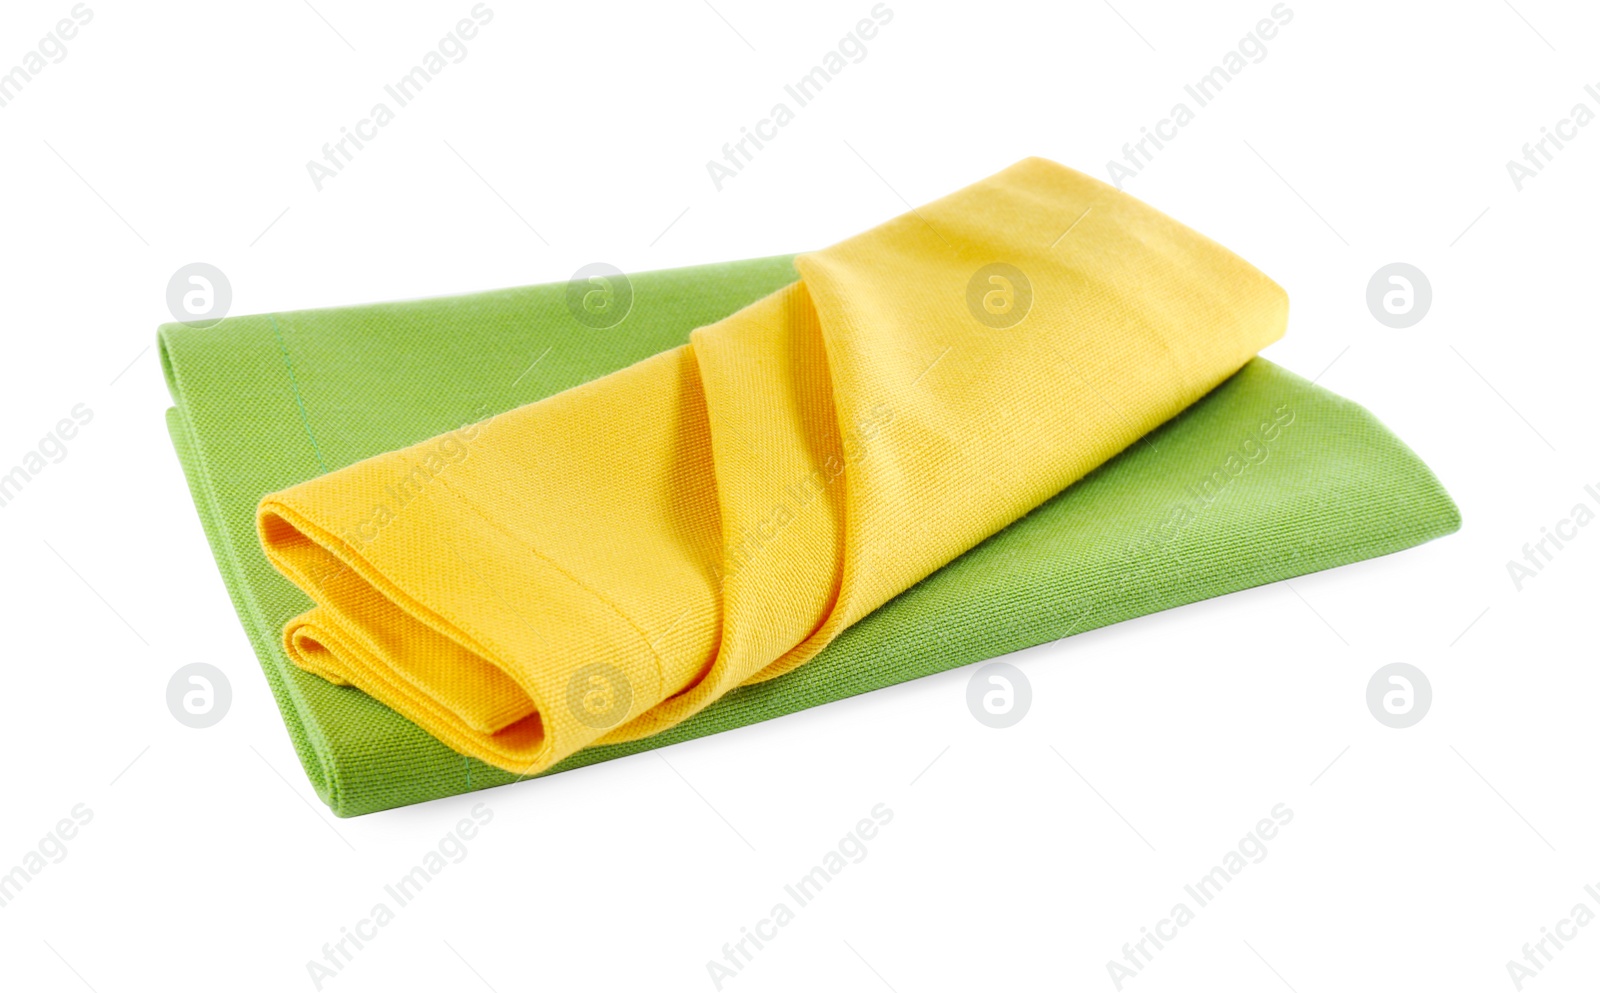 Photo of Fabric napkins for table setting isolated on white